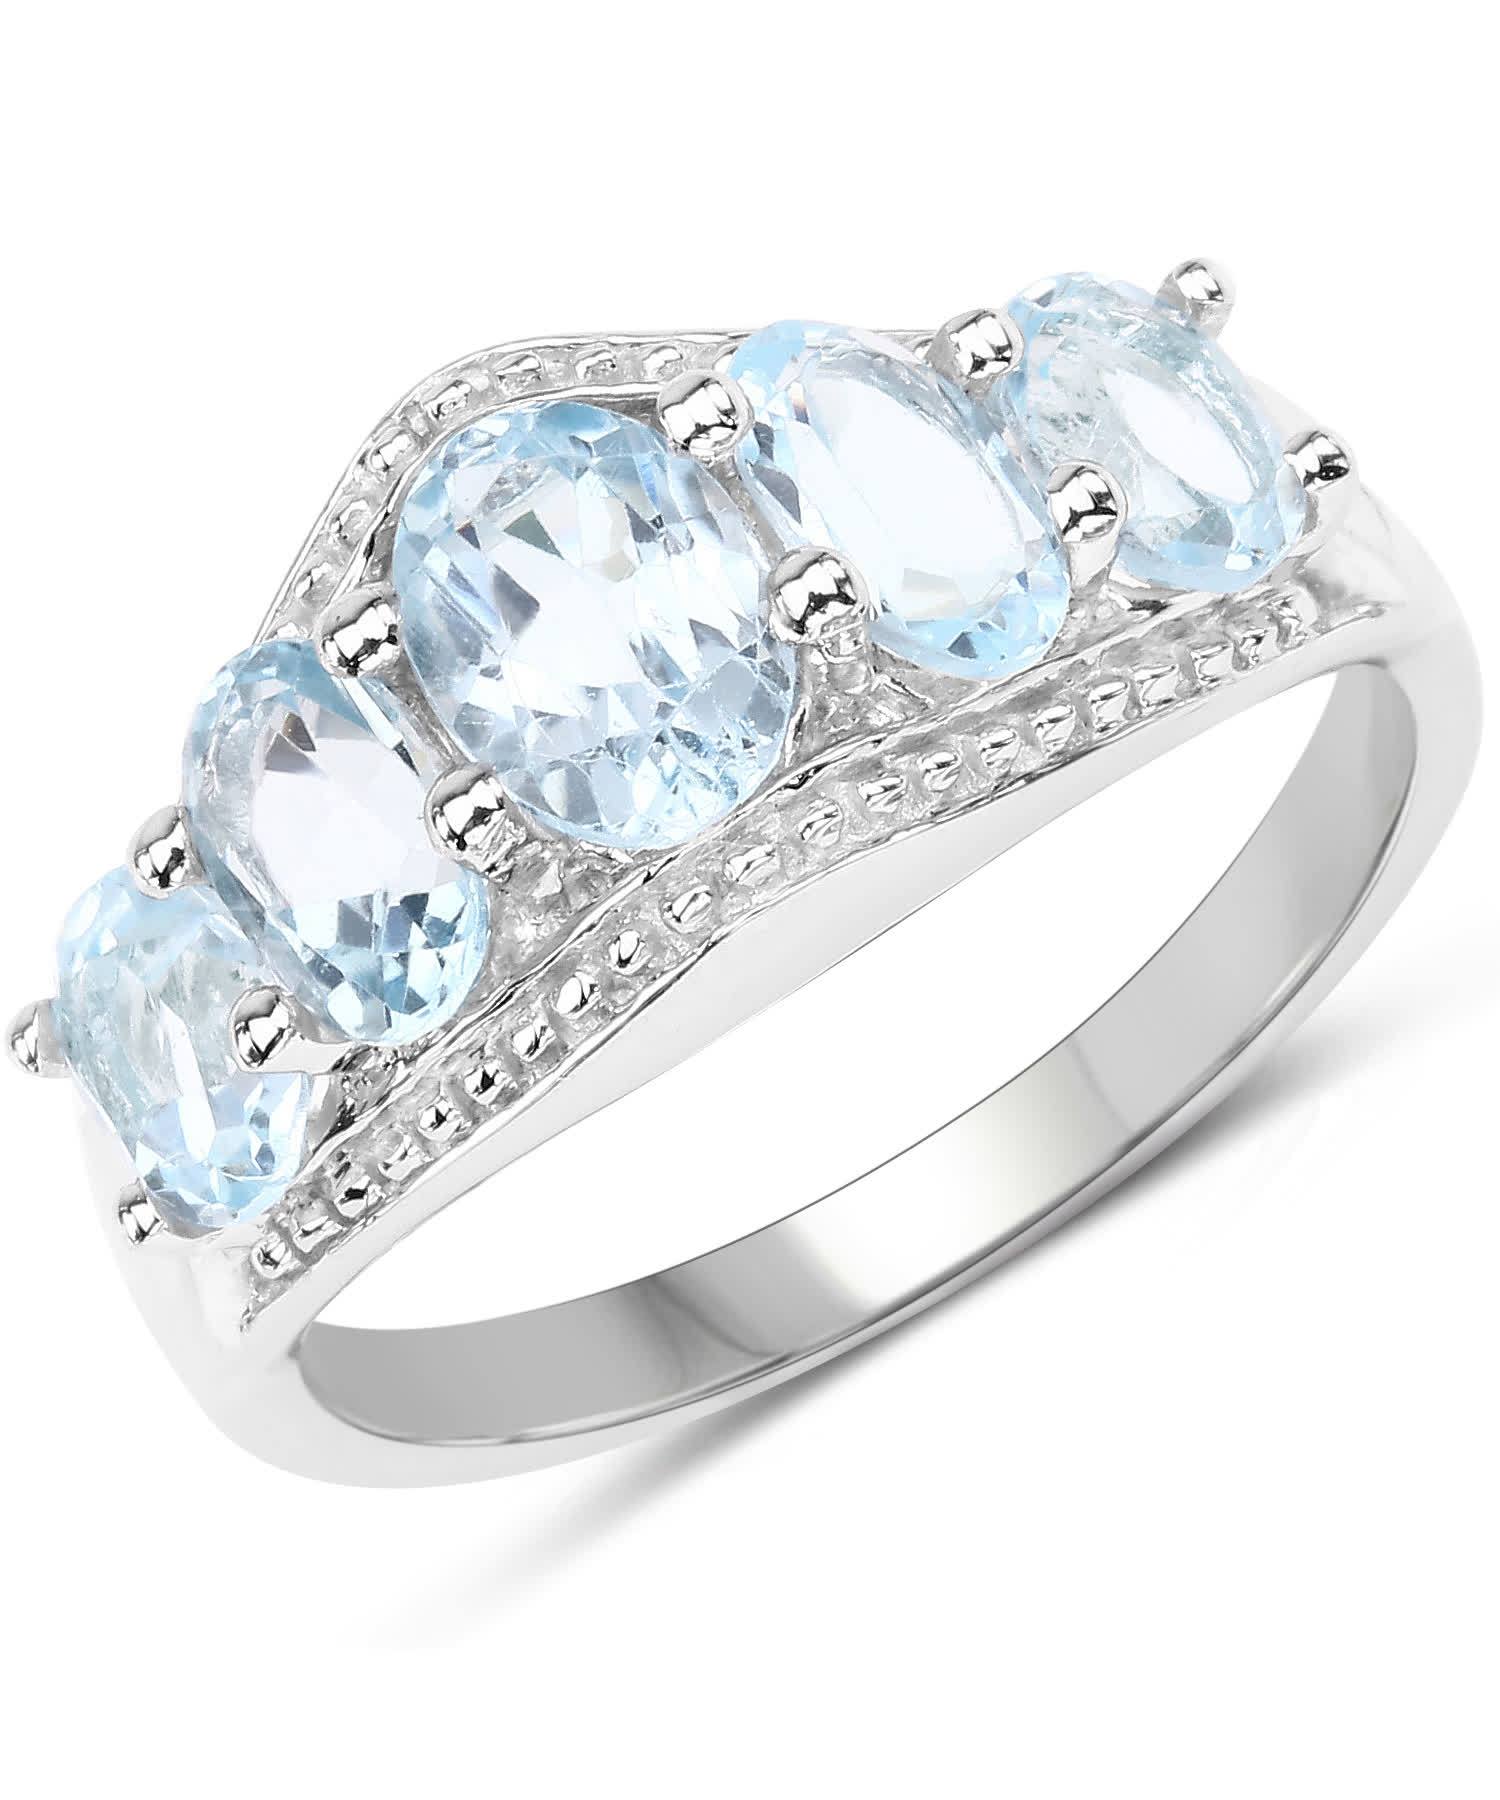 2.97ctw Natural Sky Blue Topaz Rhodium Plated 925 Sterling Silver Right Hand Ring View 1